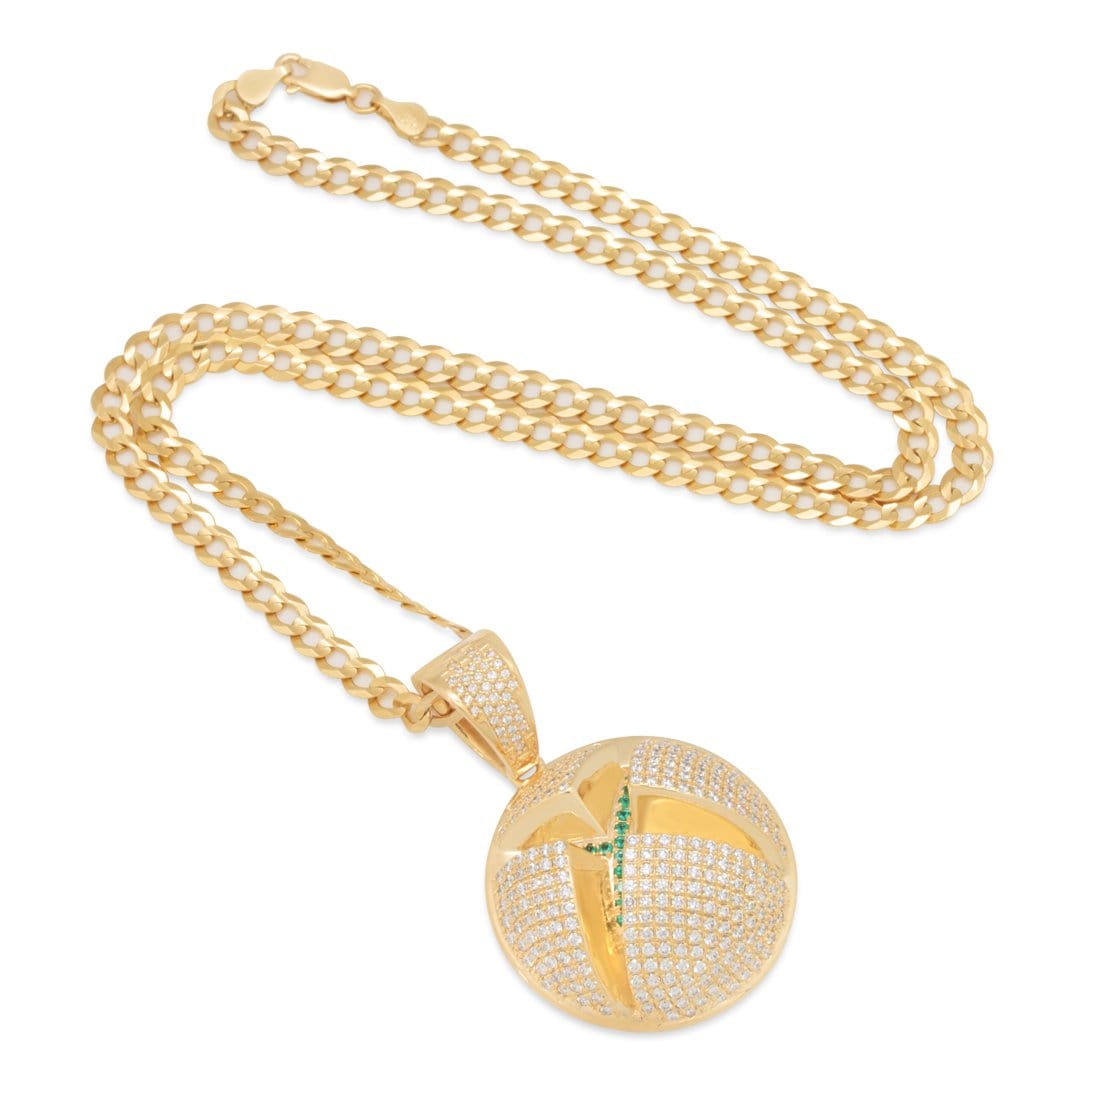 Xbox x King Ice - Solid Gold Sphere Logo Necklace  in  Solid Gold / 14K Gold / 1.8" Mens Necklaces